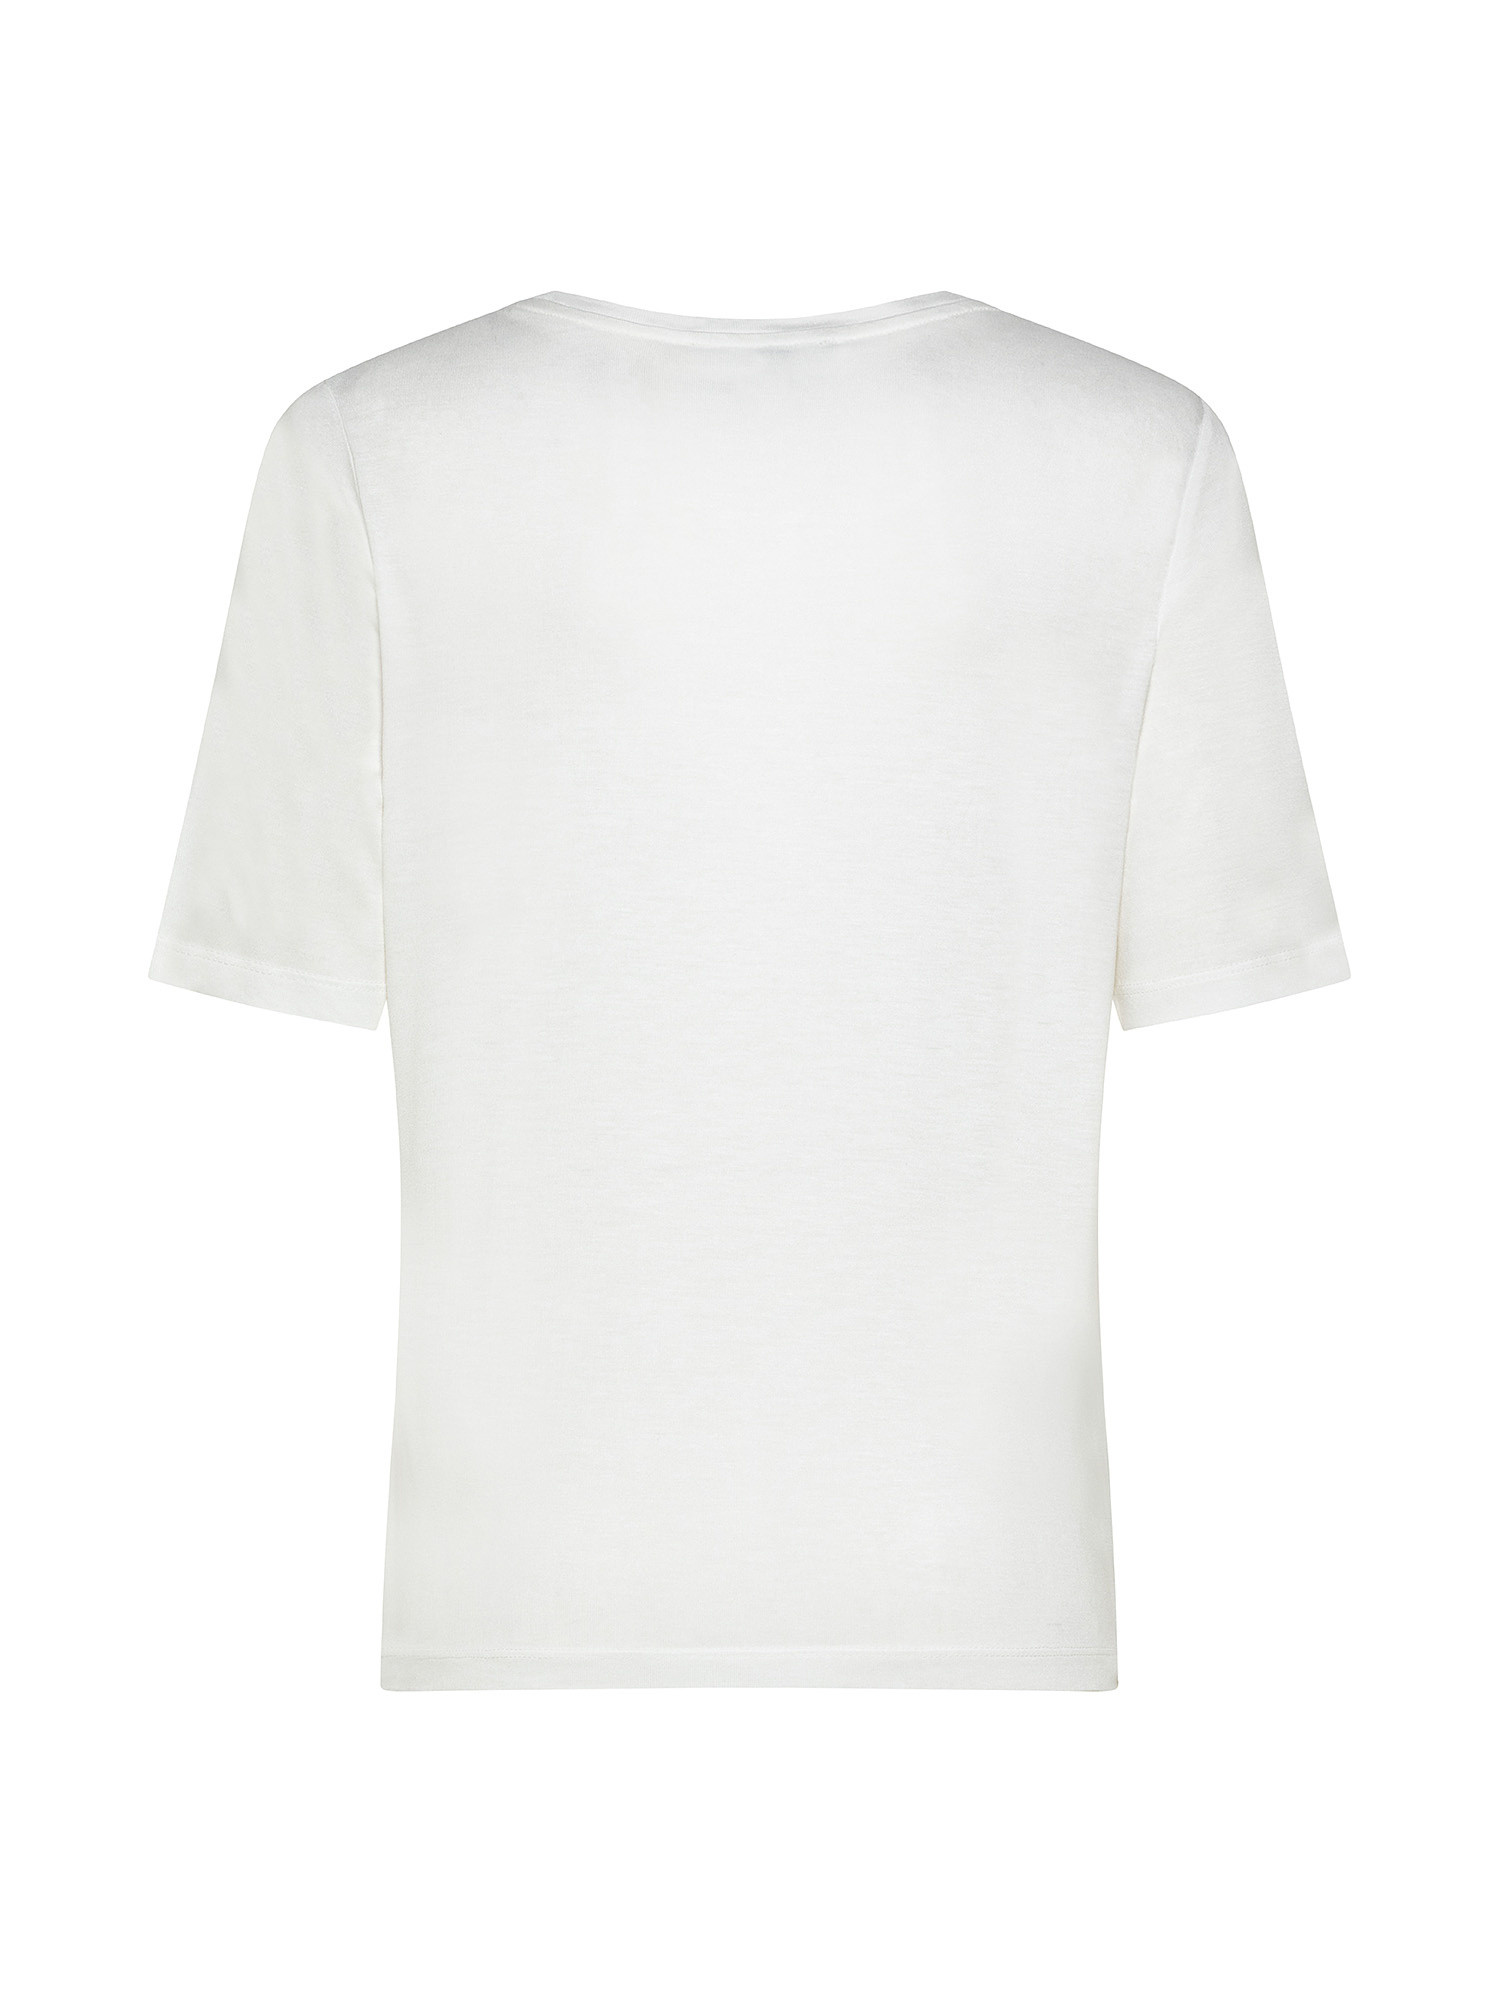 T-shirt con scritta stampata, Bianco, large image number 1